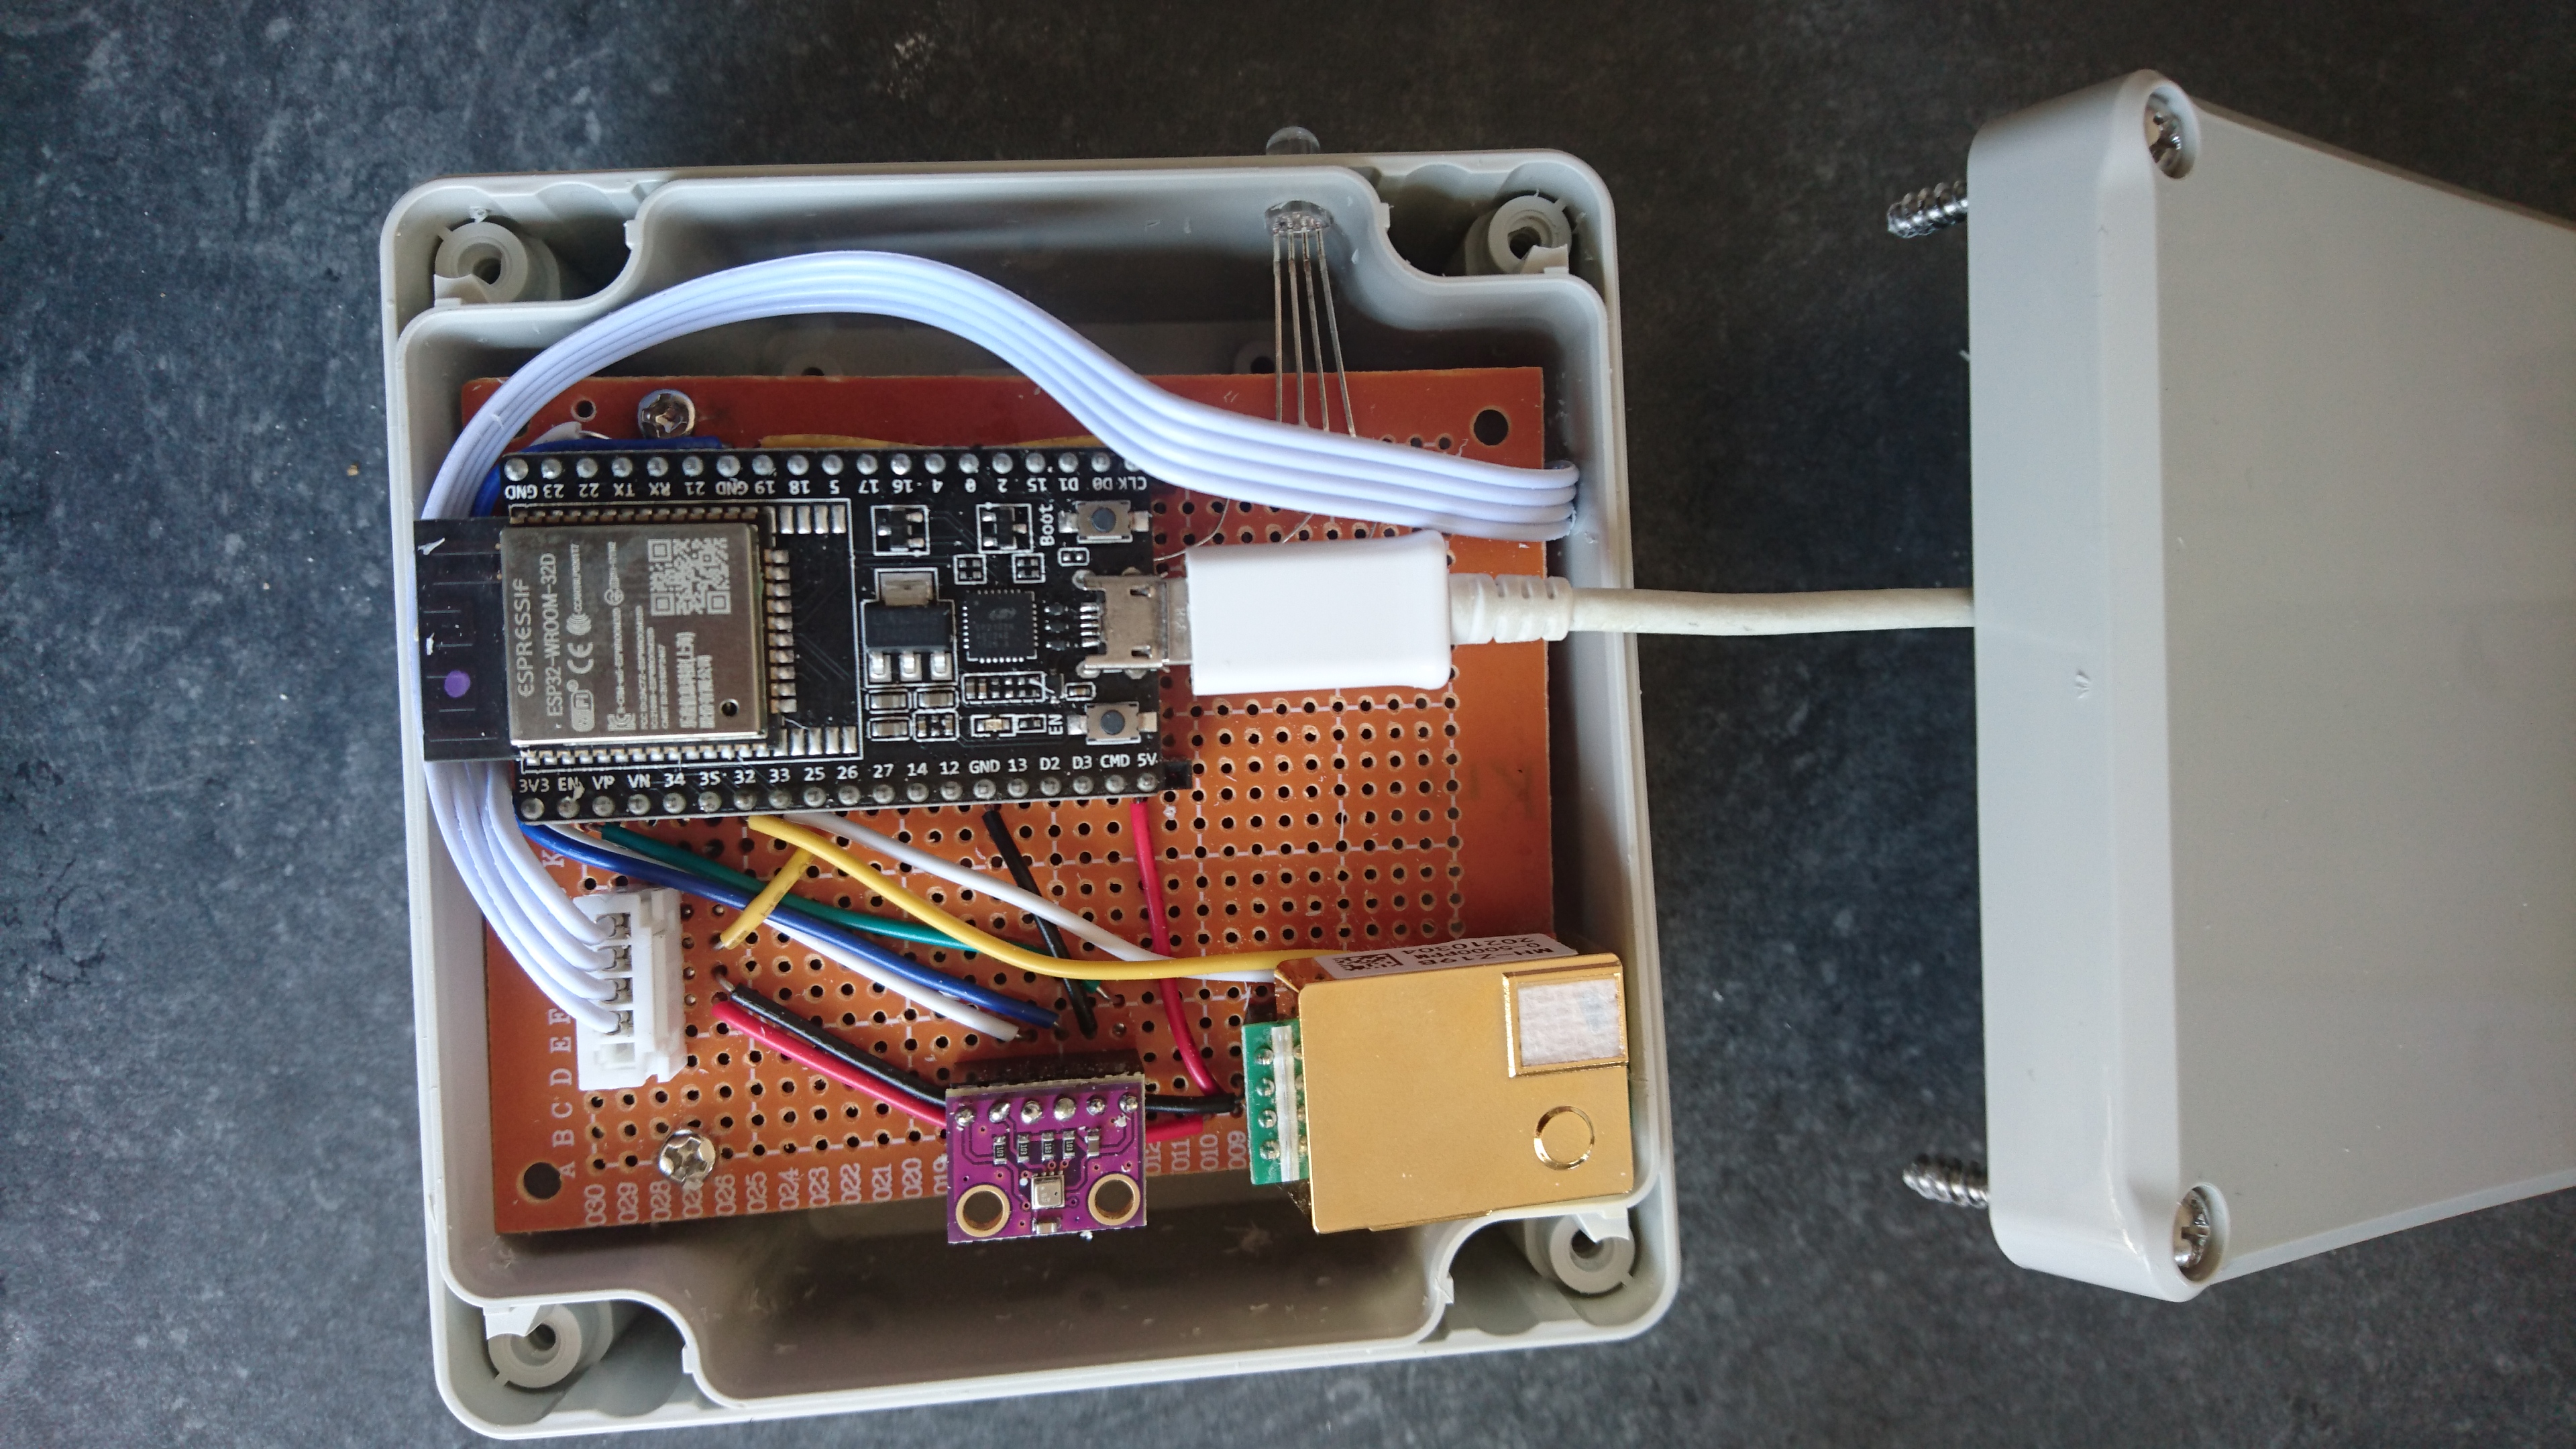 A DIY air quality monitor on a perfboard in a project box